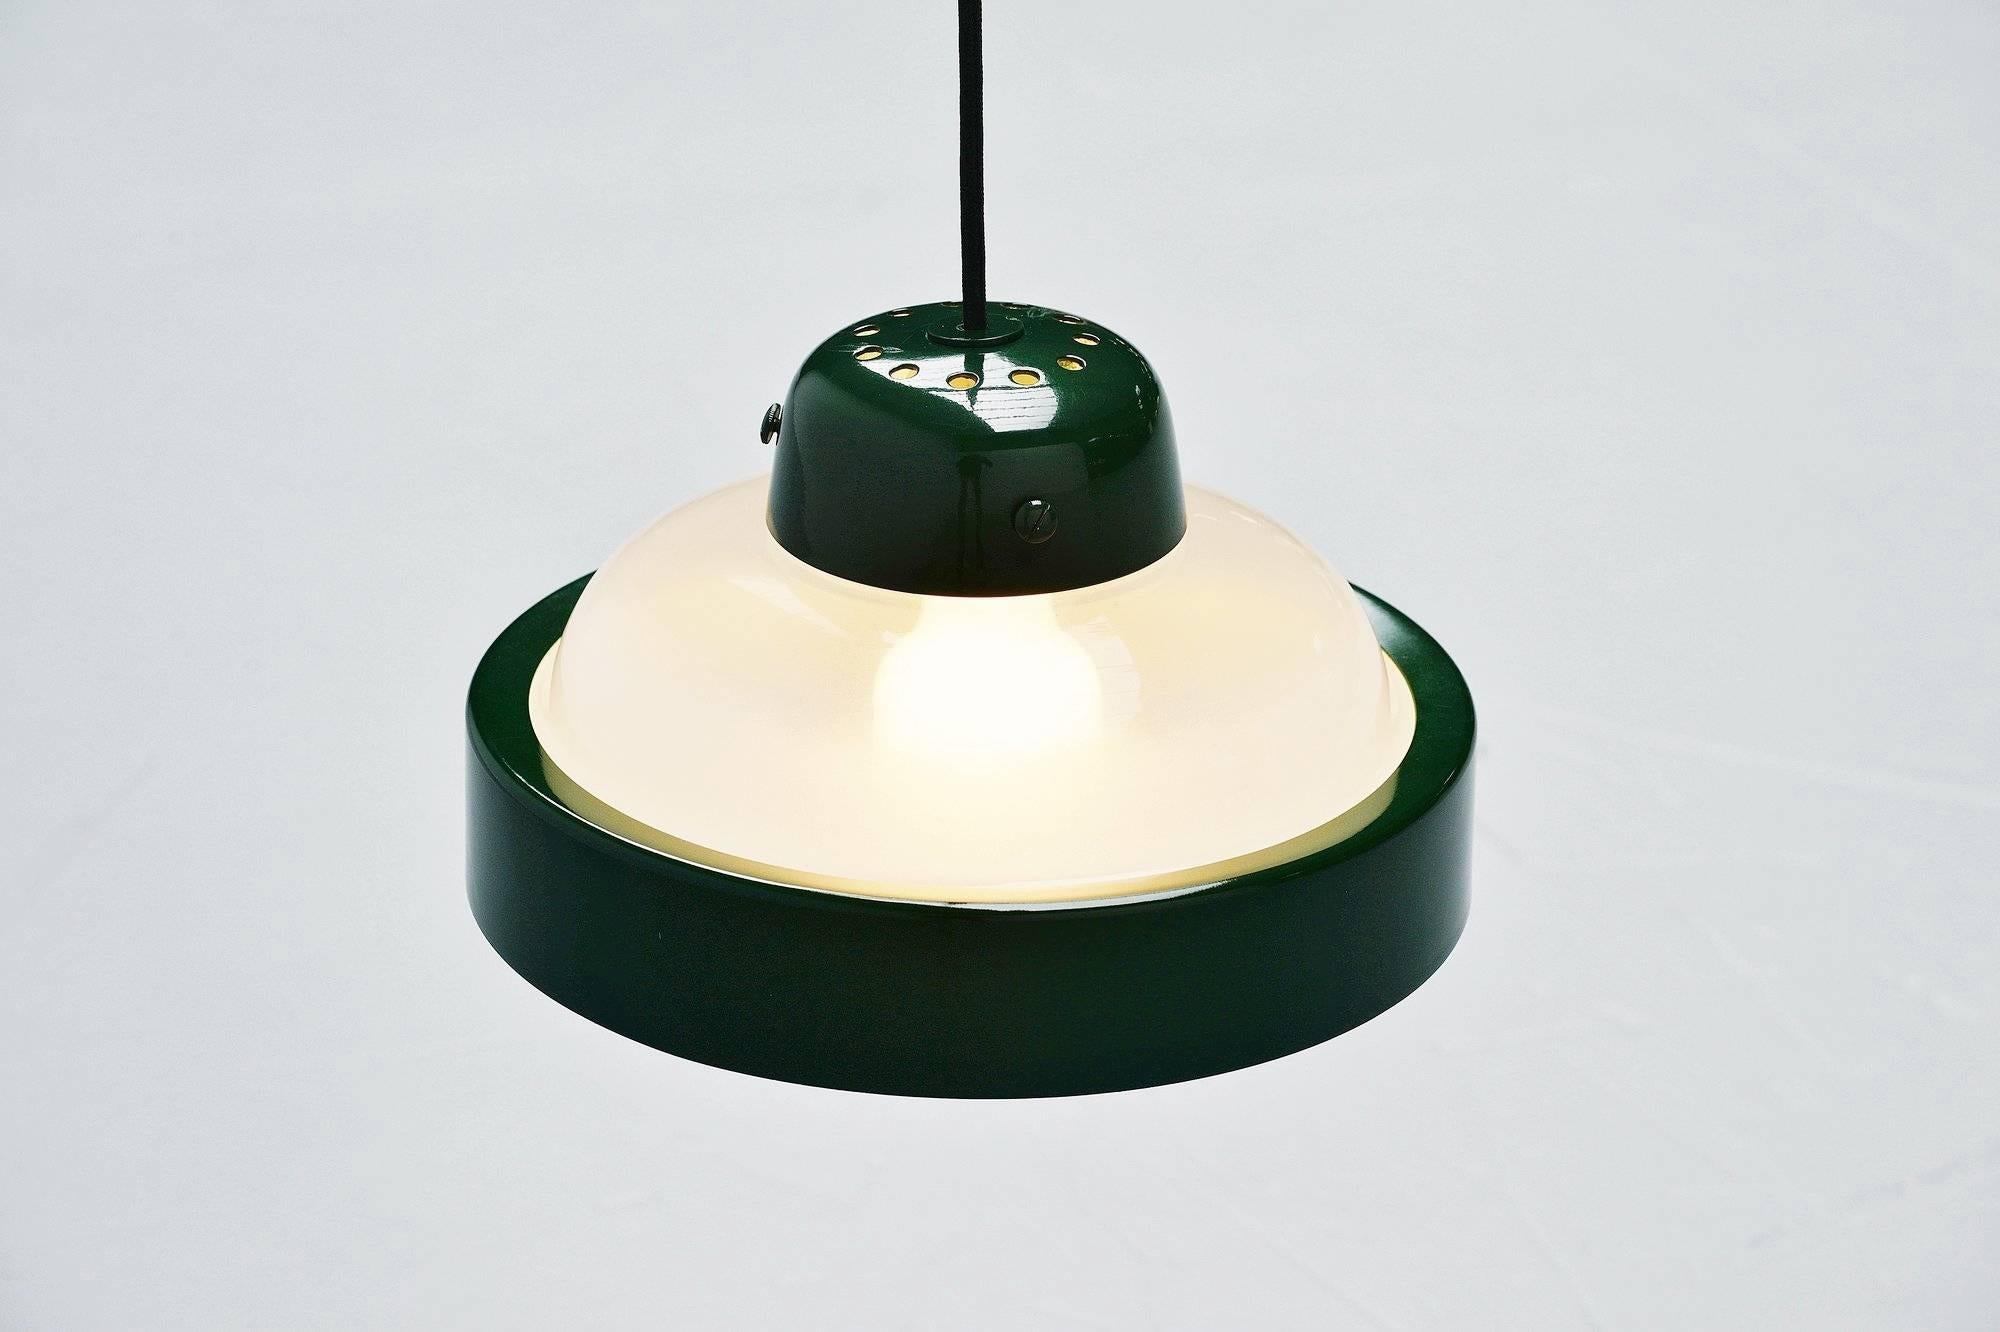 Gino Sarfatti Pendant Lamp Model 2102p Arteluce, 1959 In Excellent Condition For Sale In Roosendaal, NL